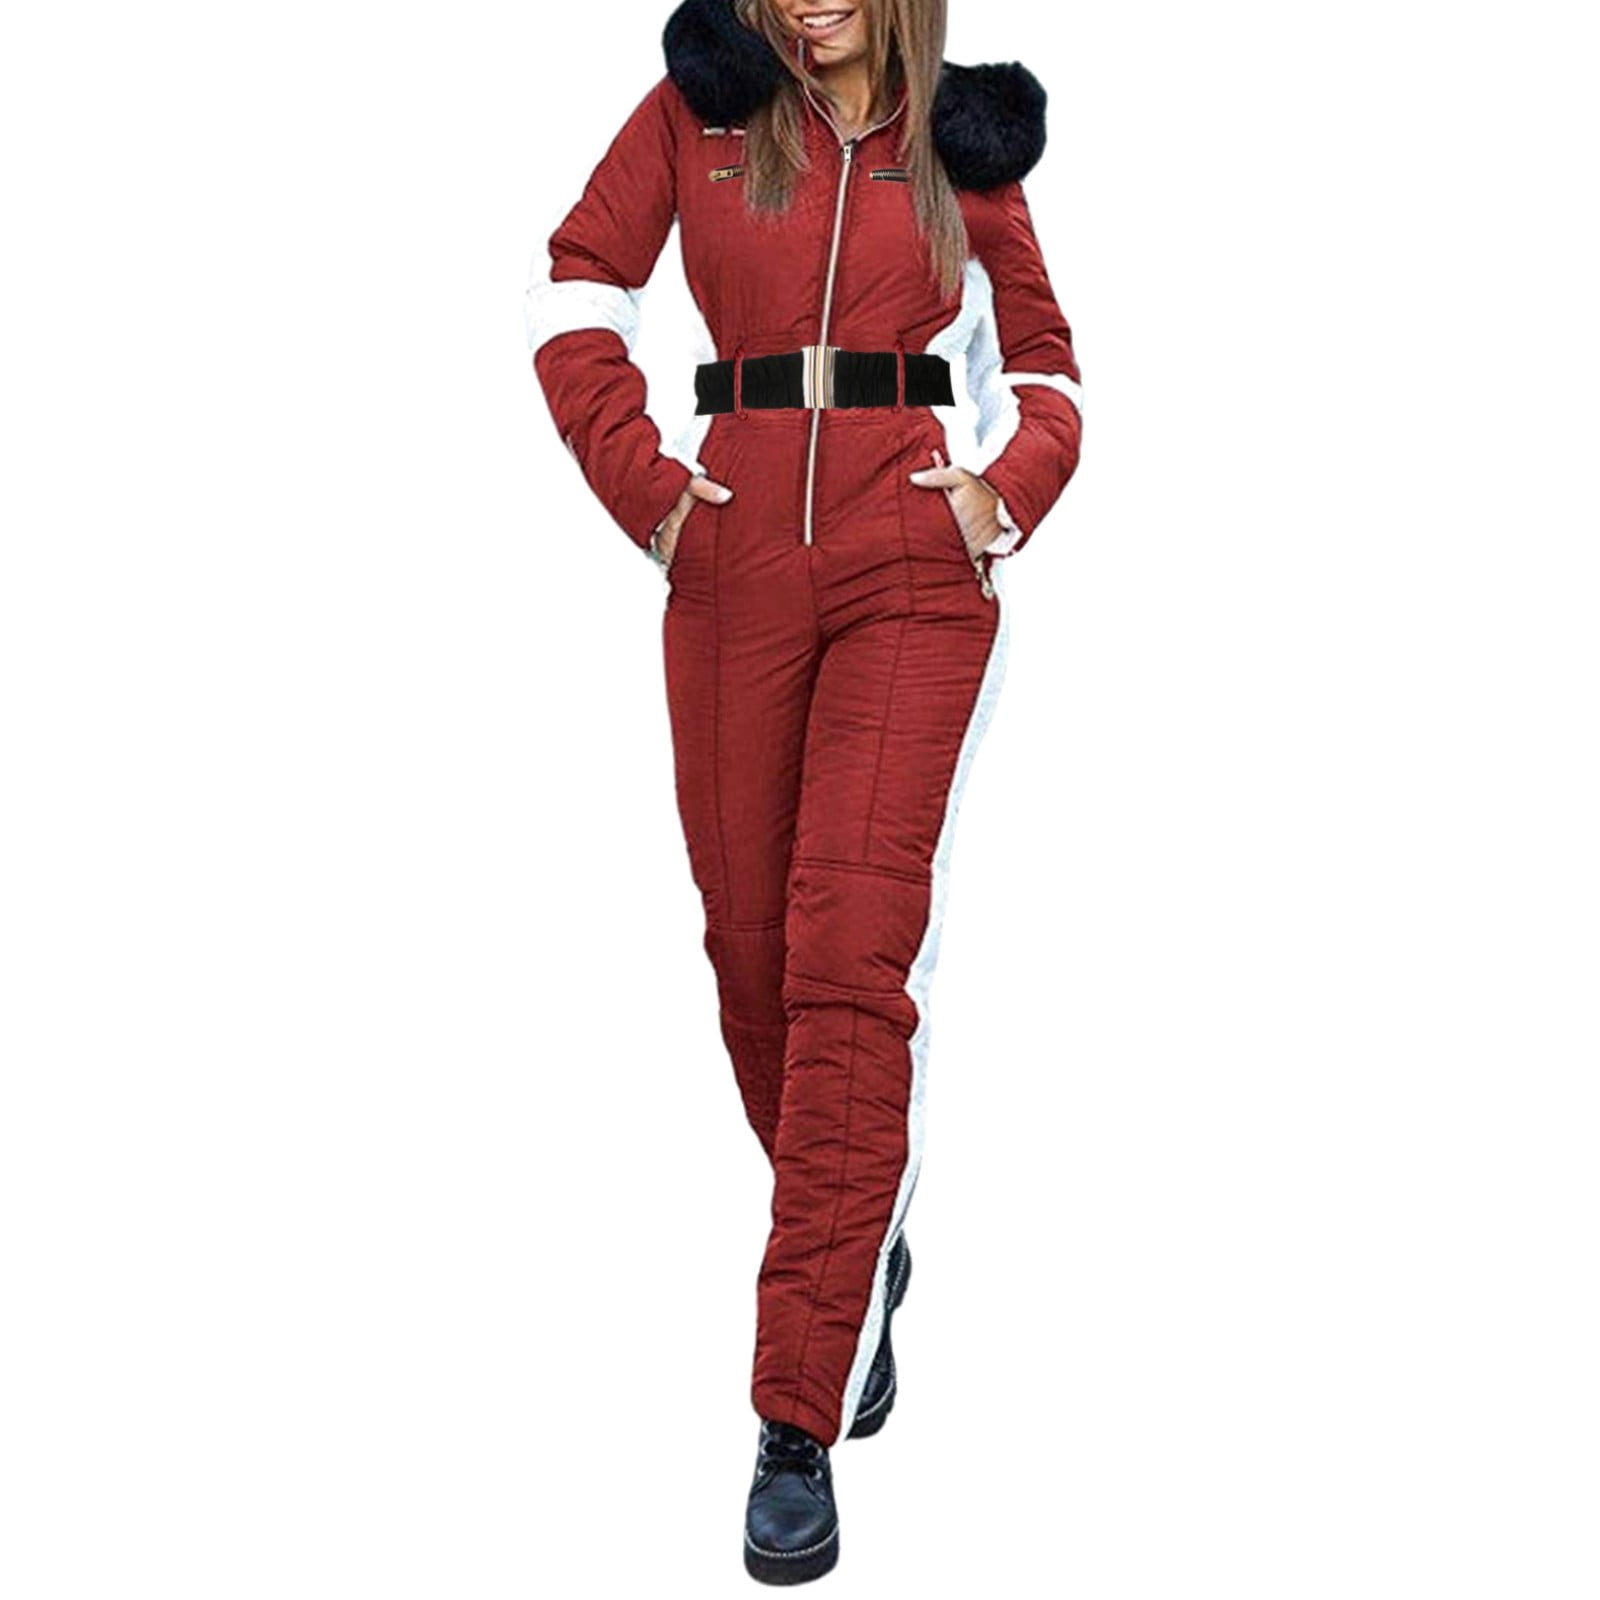 Winter Long Sleeve Workout Athletic Snow Puffer Jacket for Women Red  Women's Outdoor Sports Jumpsuit ' with Removable Collar Zipper Ski Suit 